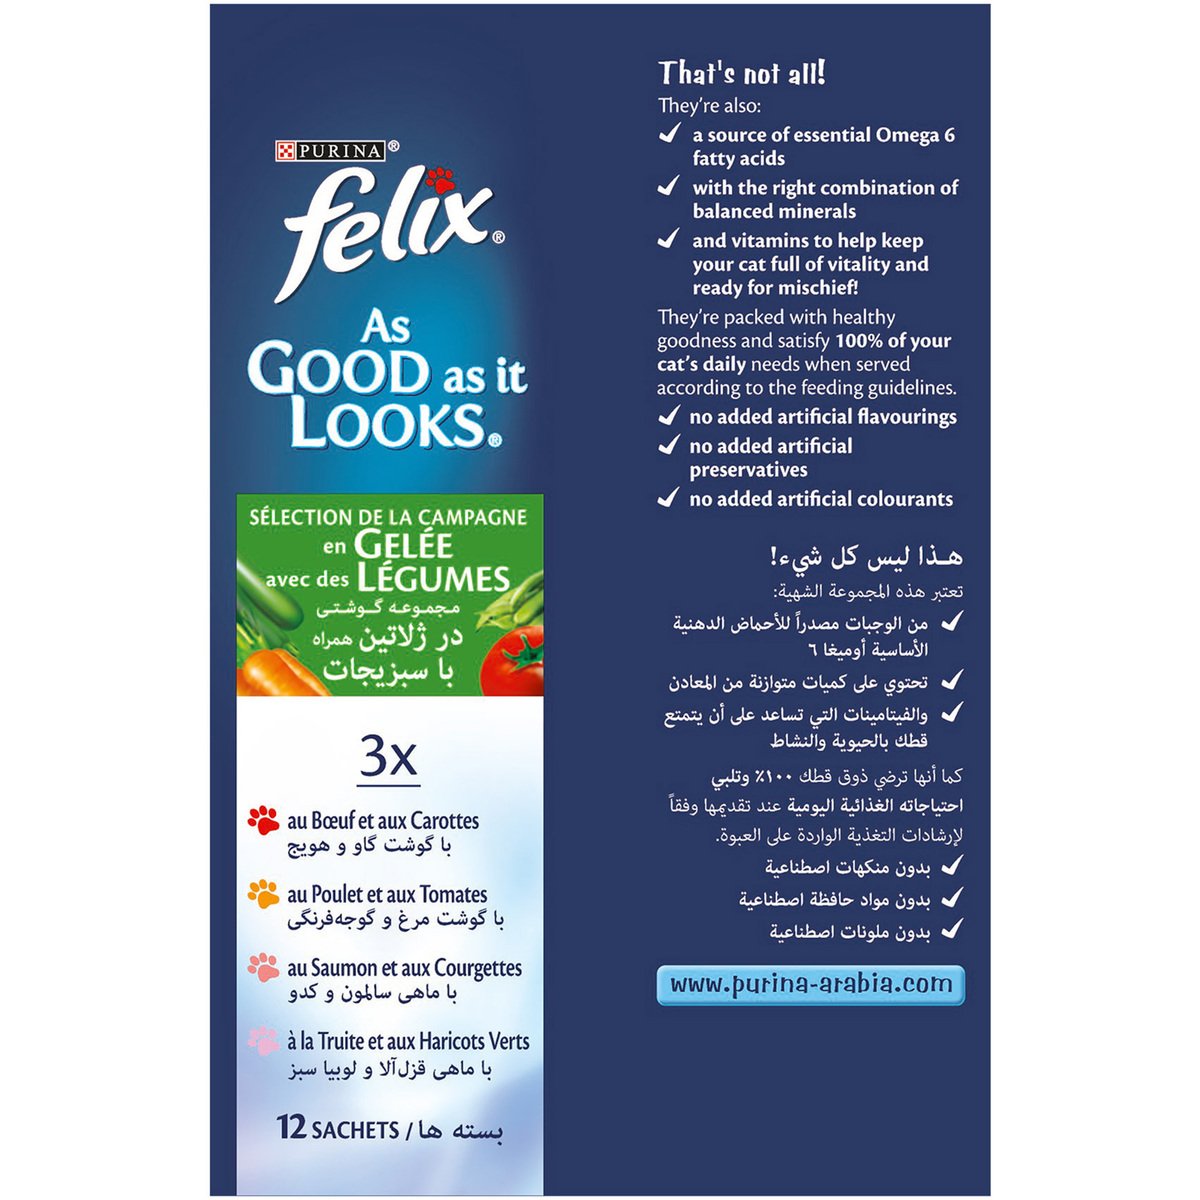 Purina Felix as Good as it Looks In Jelly with Vegetable 12 x 100g